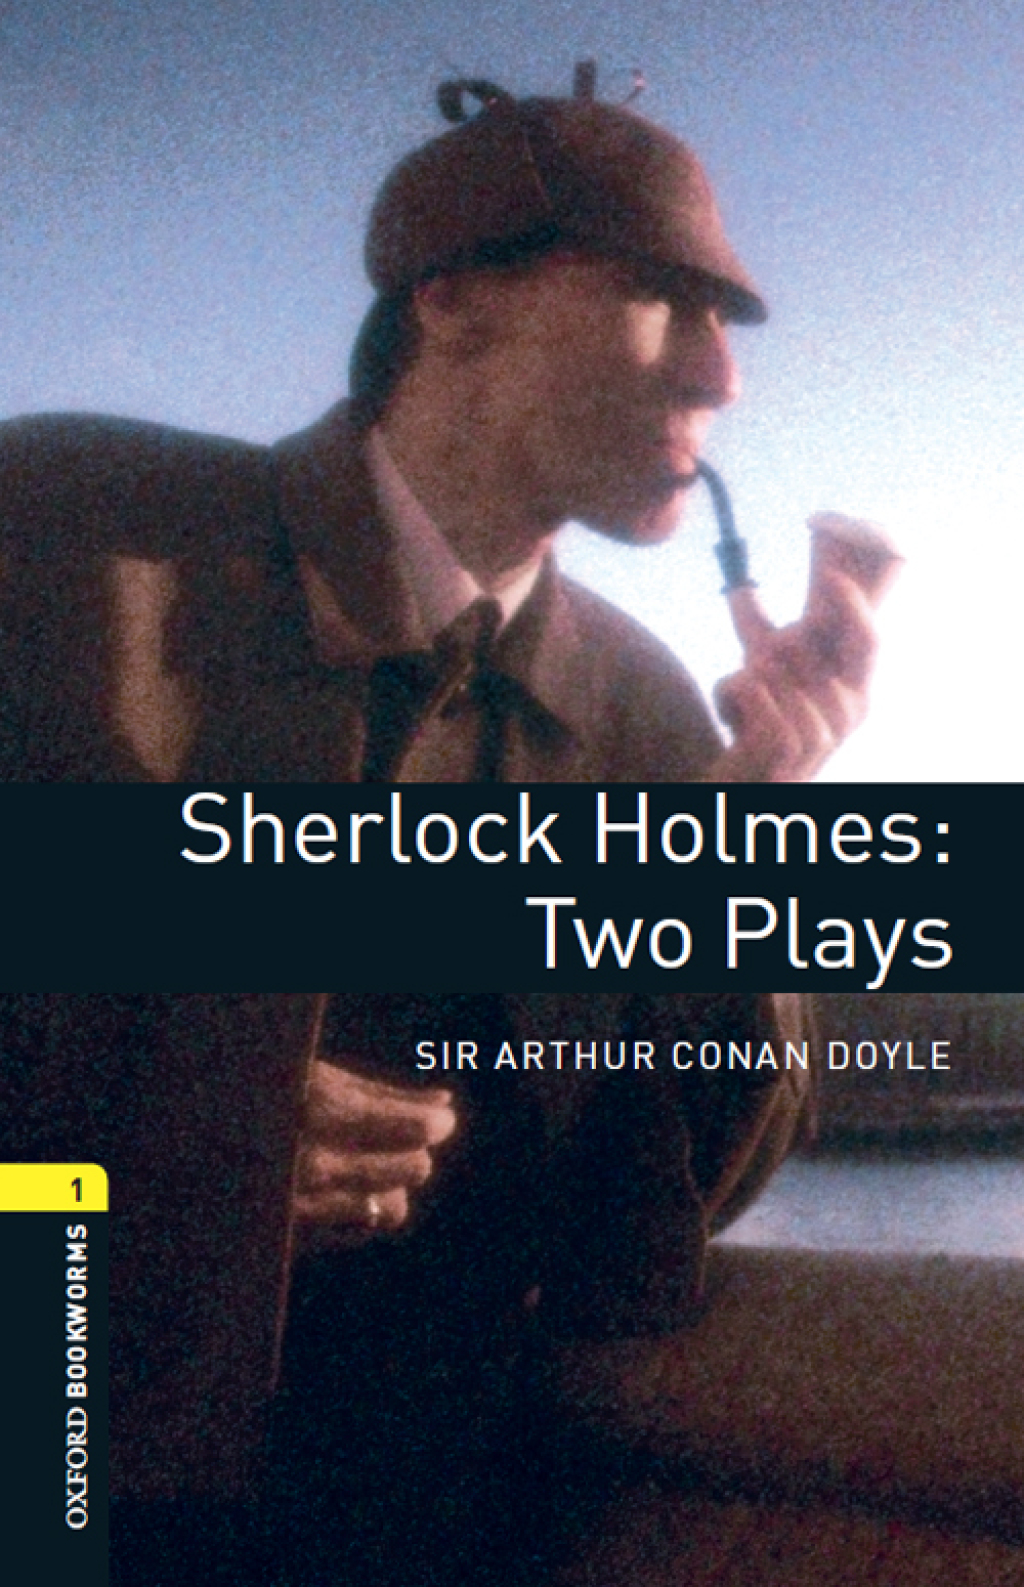 Sherlock Holmes: Two Plays Level 1 Oxford Bookworms Library - 3rd Edition (eBook Rental)